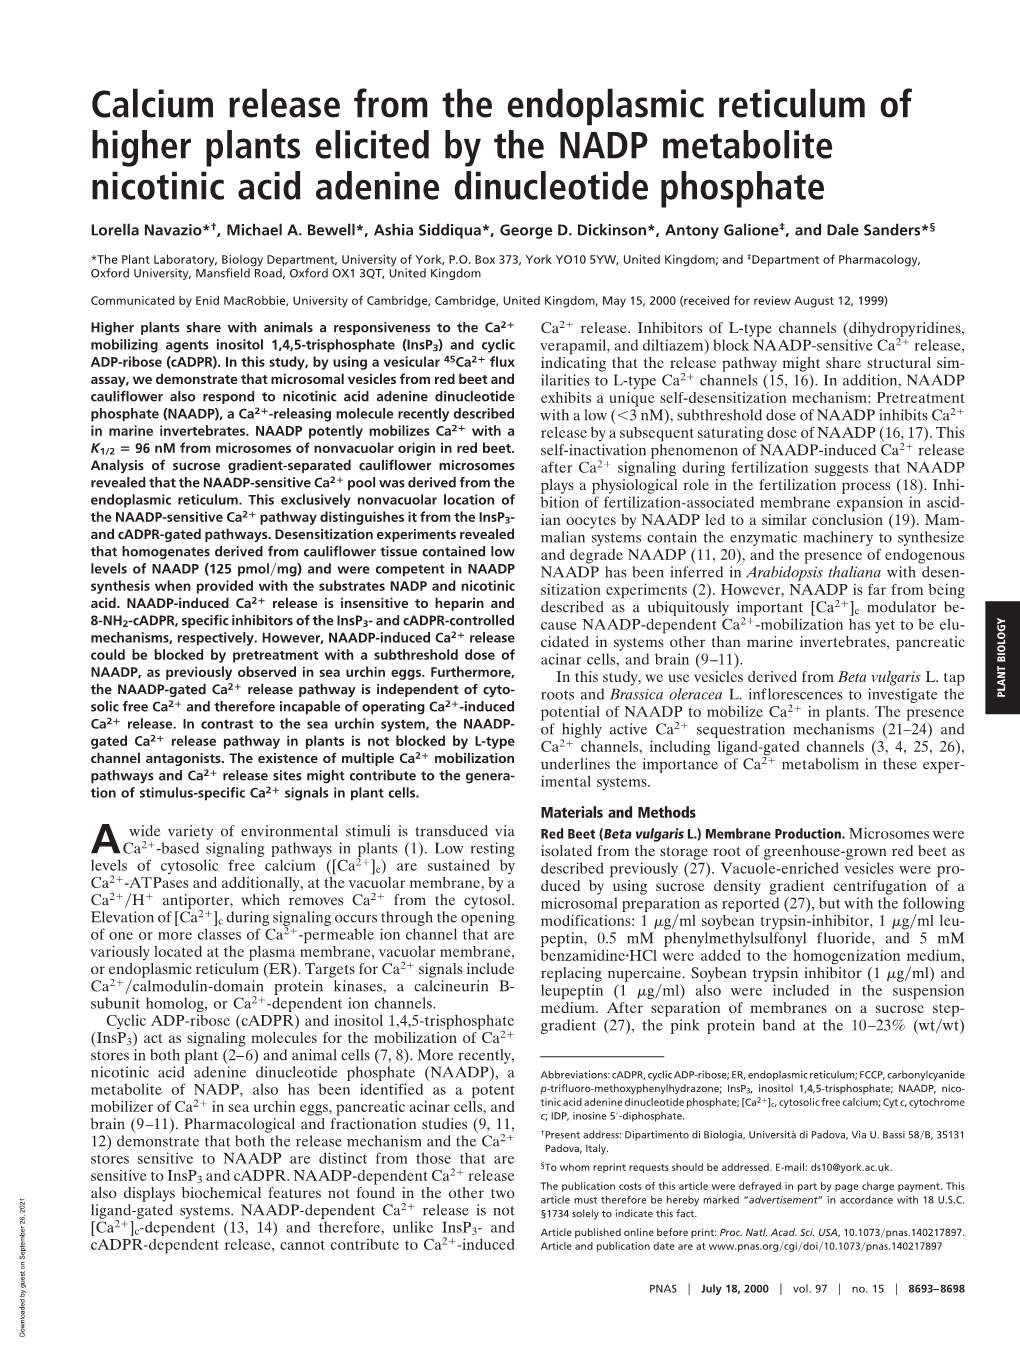 Calcium Release from the Endoplasmic Reticulum of Higher Plants Elicited by the NADP Metabolite Nicotinic Acid Adenine Dinucleotide Phosphate